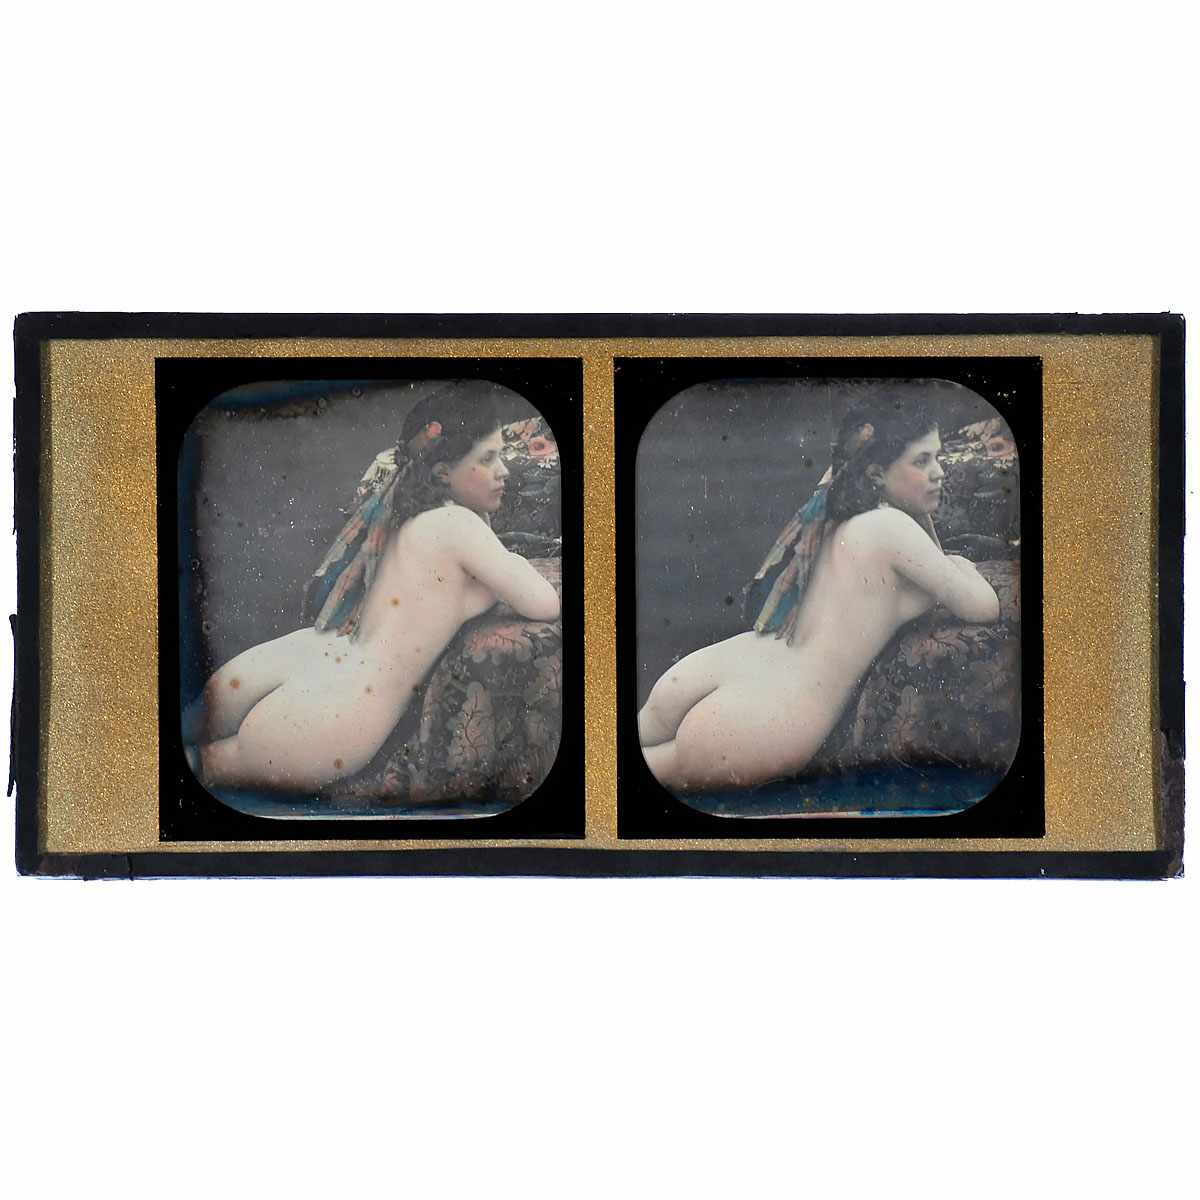 French Stereo Nude Daguerreotype, c. 1845 (from the Collection of "Hoffotograf Peter Elfelt")